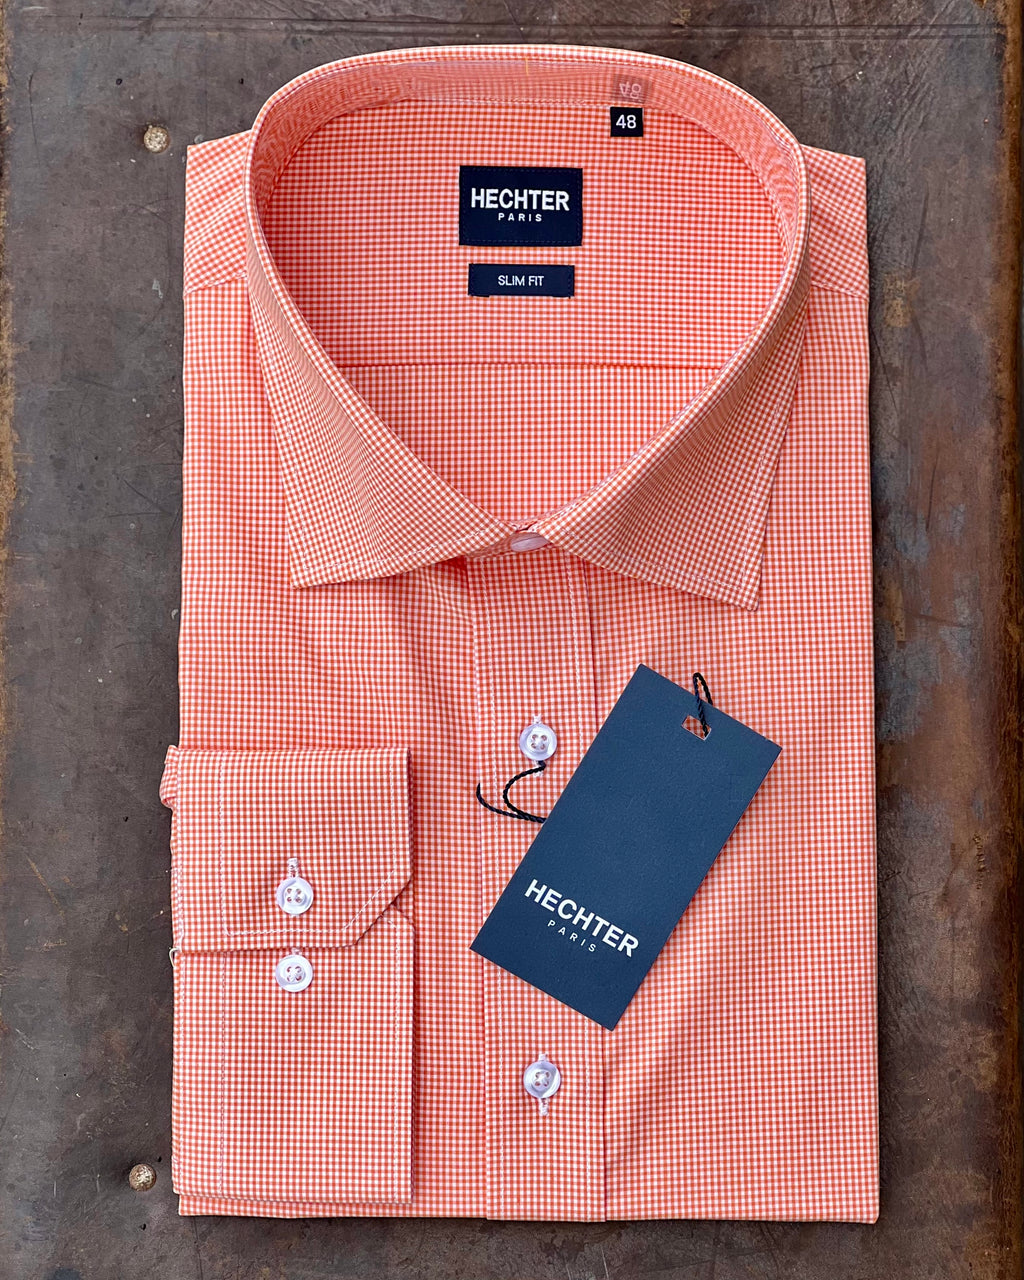 Long sleeve cotton shirt by Daniel Hechter in orange micro check